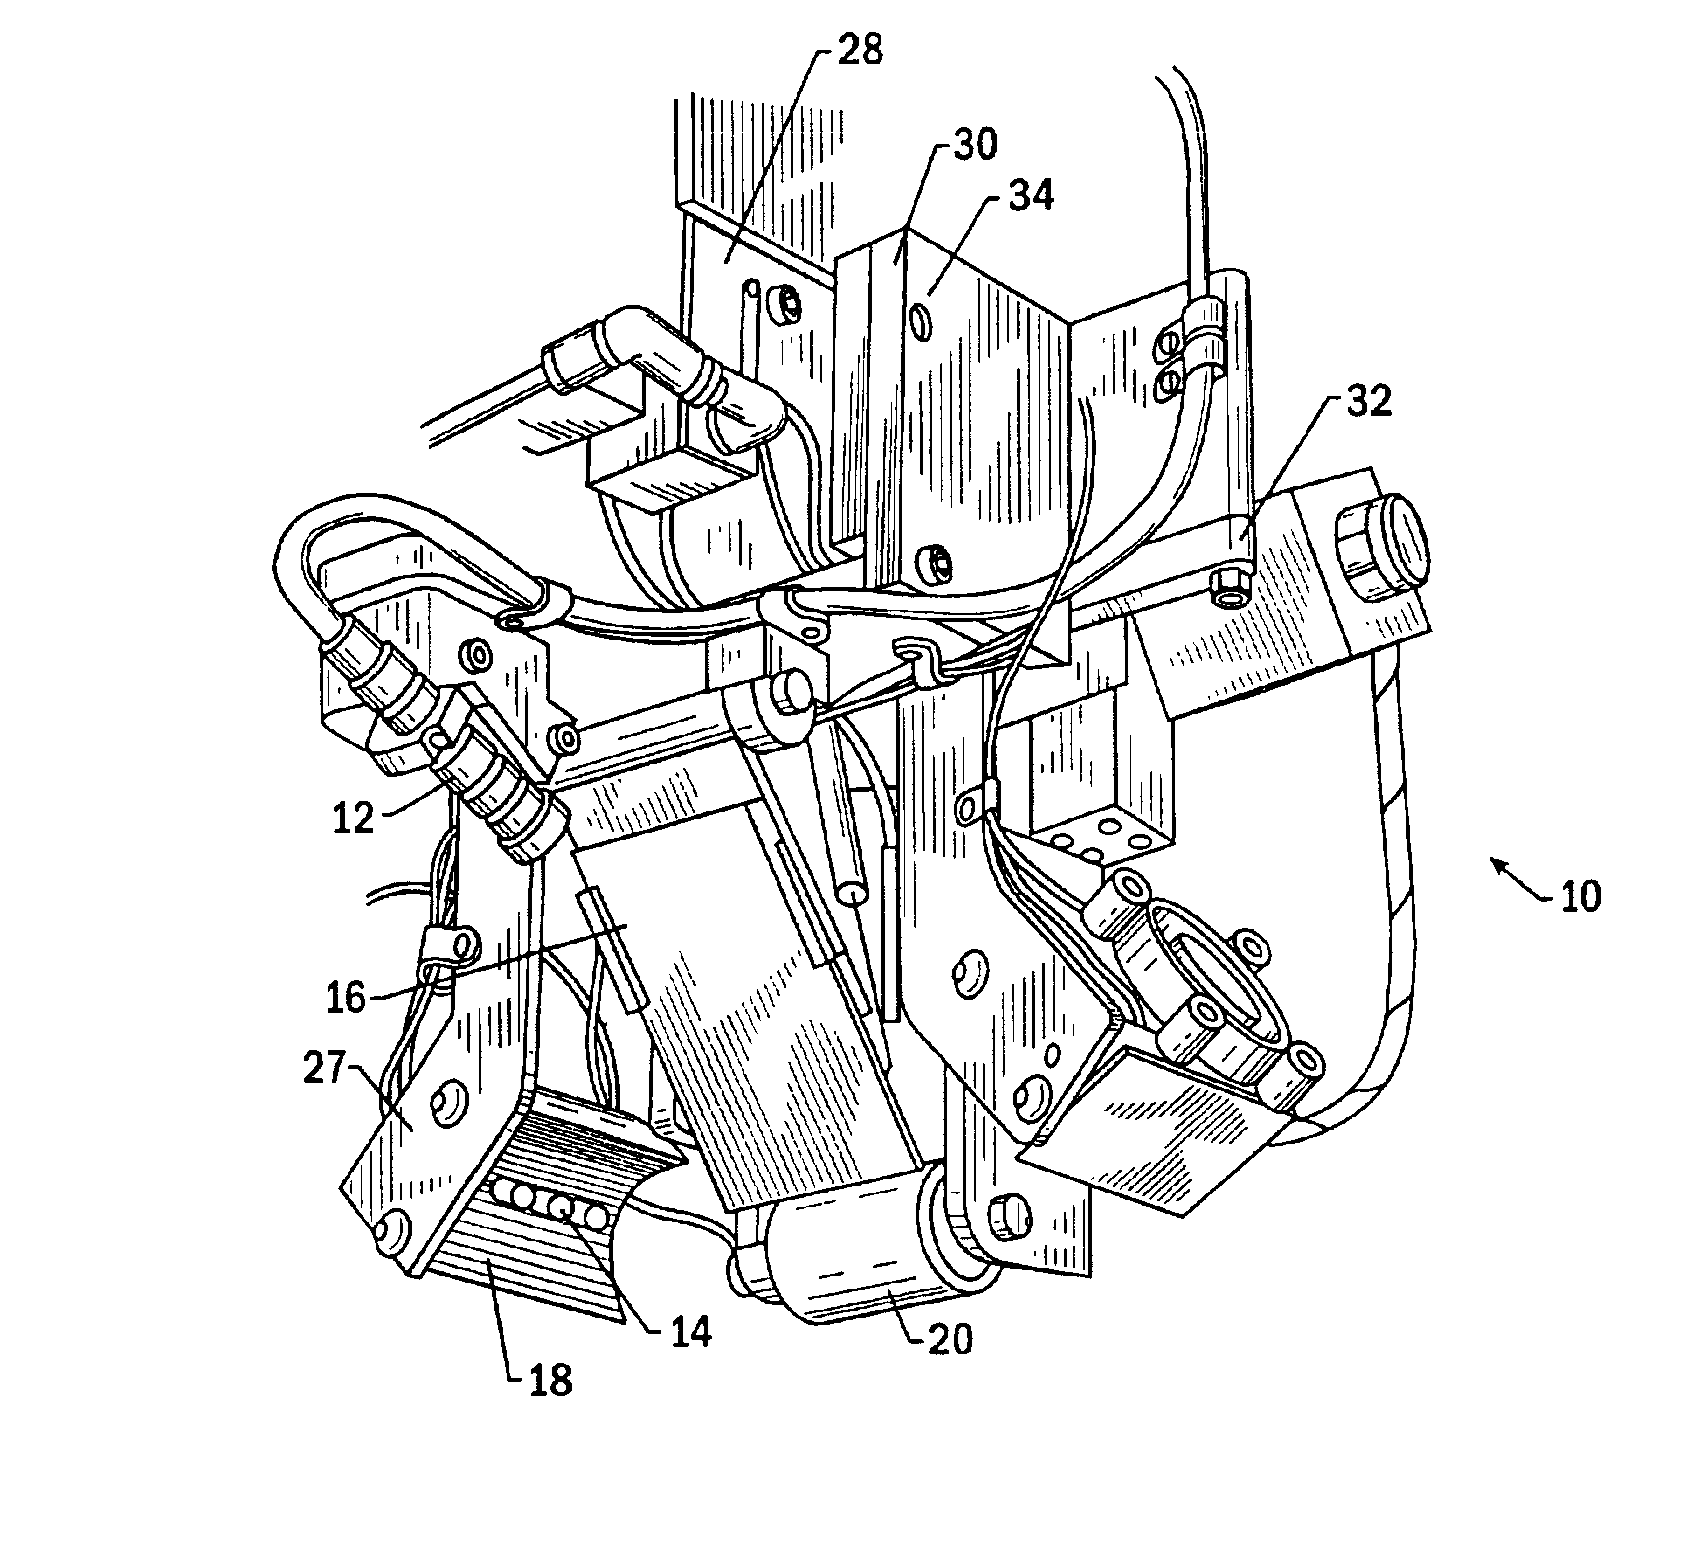 System for identifying defects in a composite structure